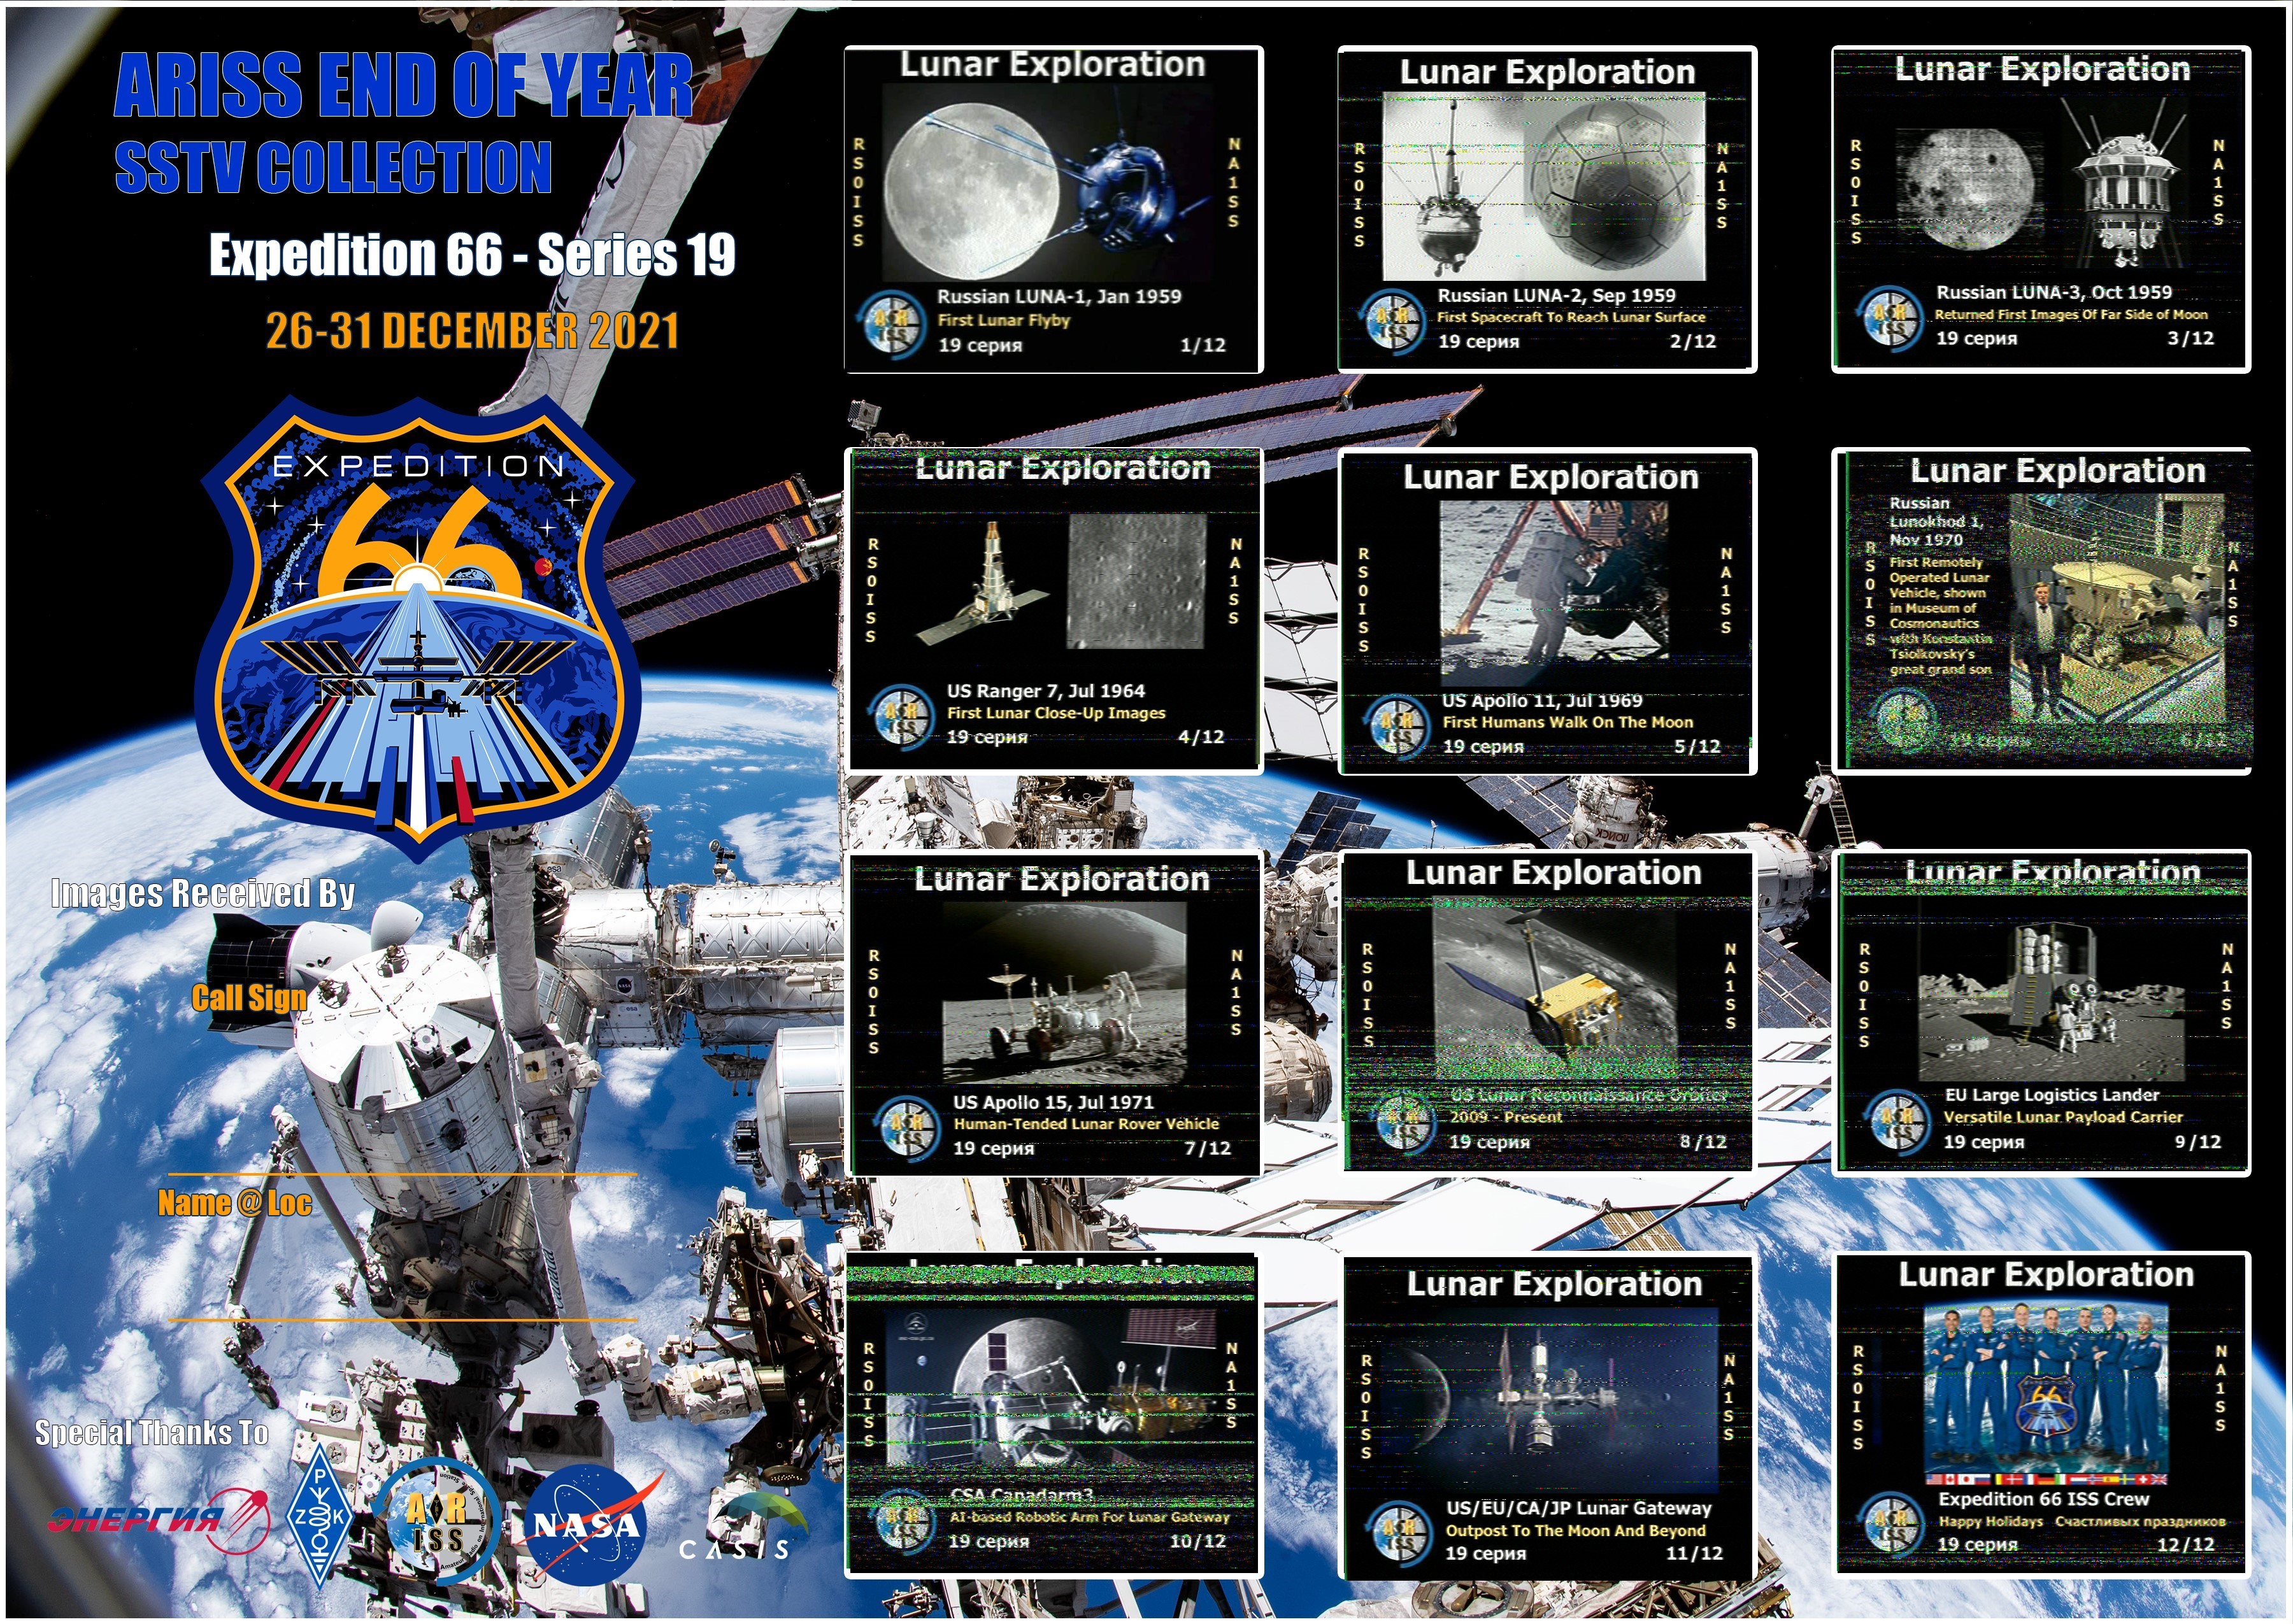 END OF YEAR SSTV Collection DEC 26-31, 2021.jpg